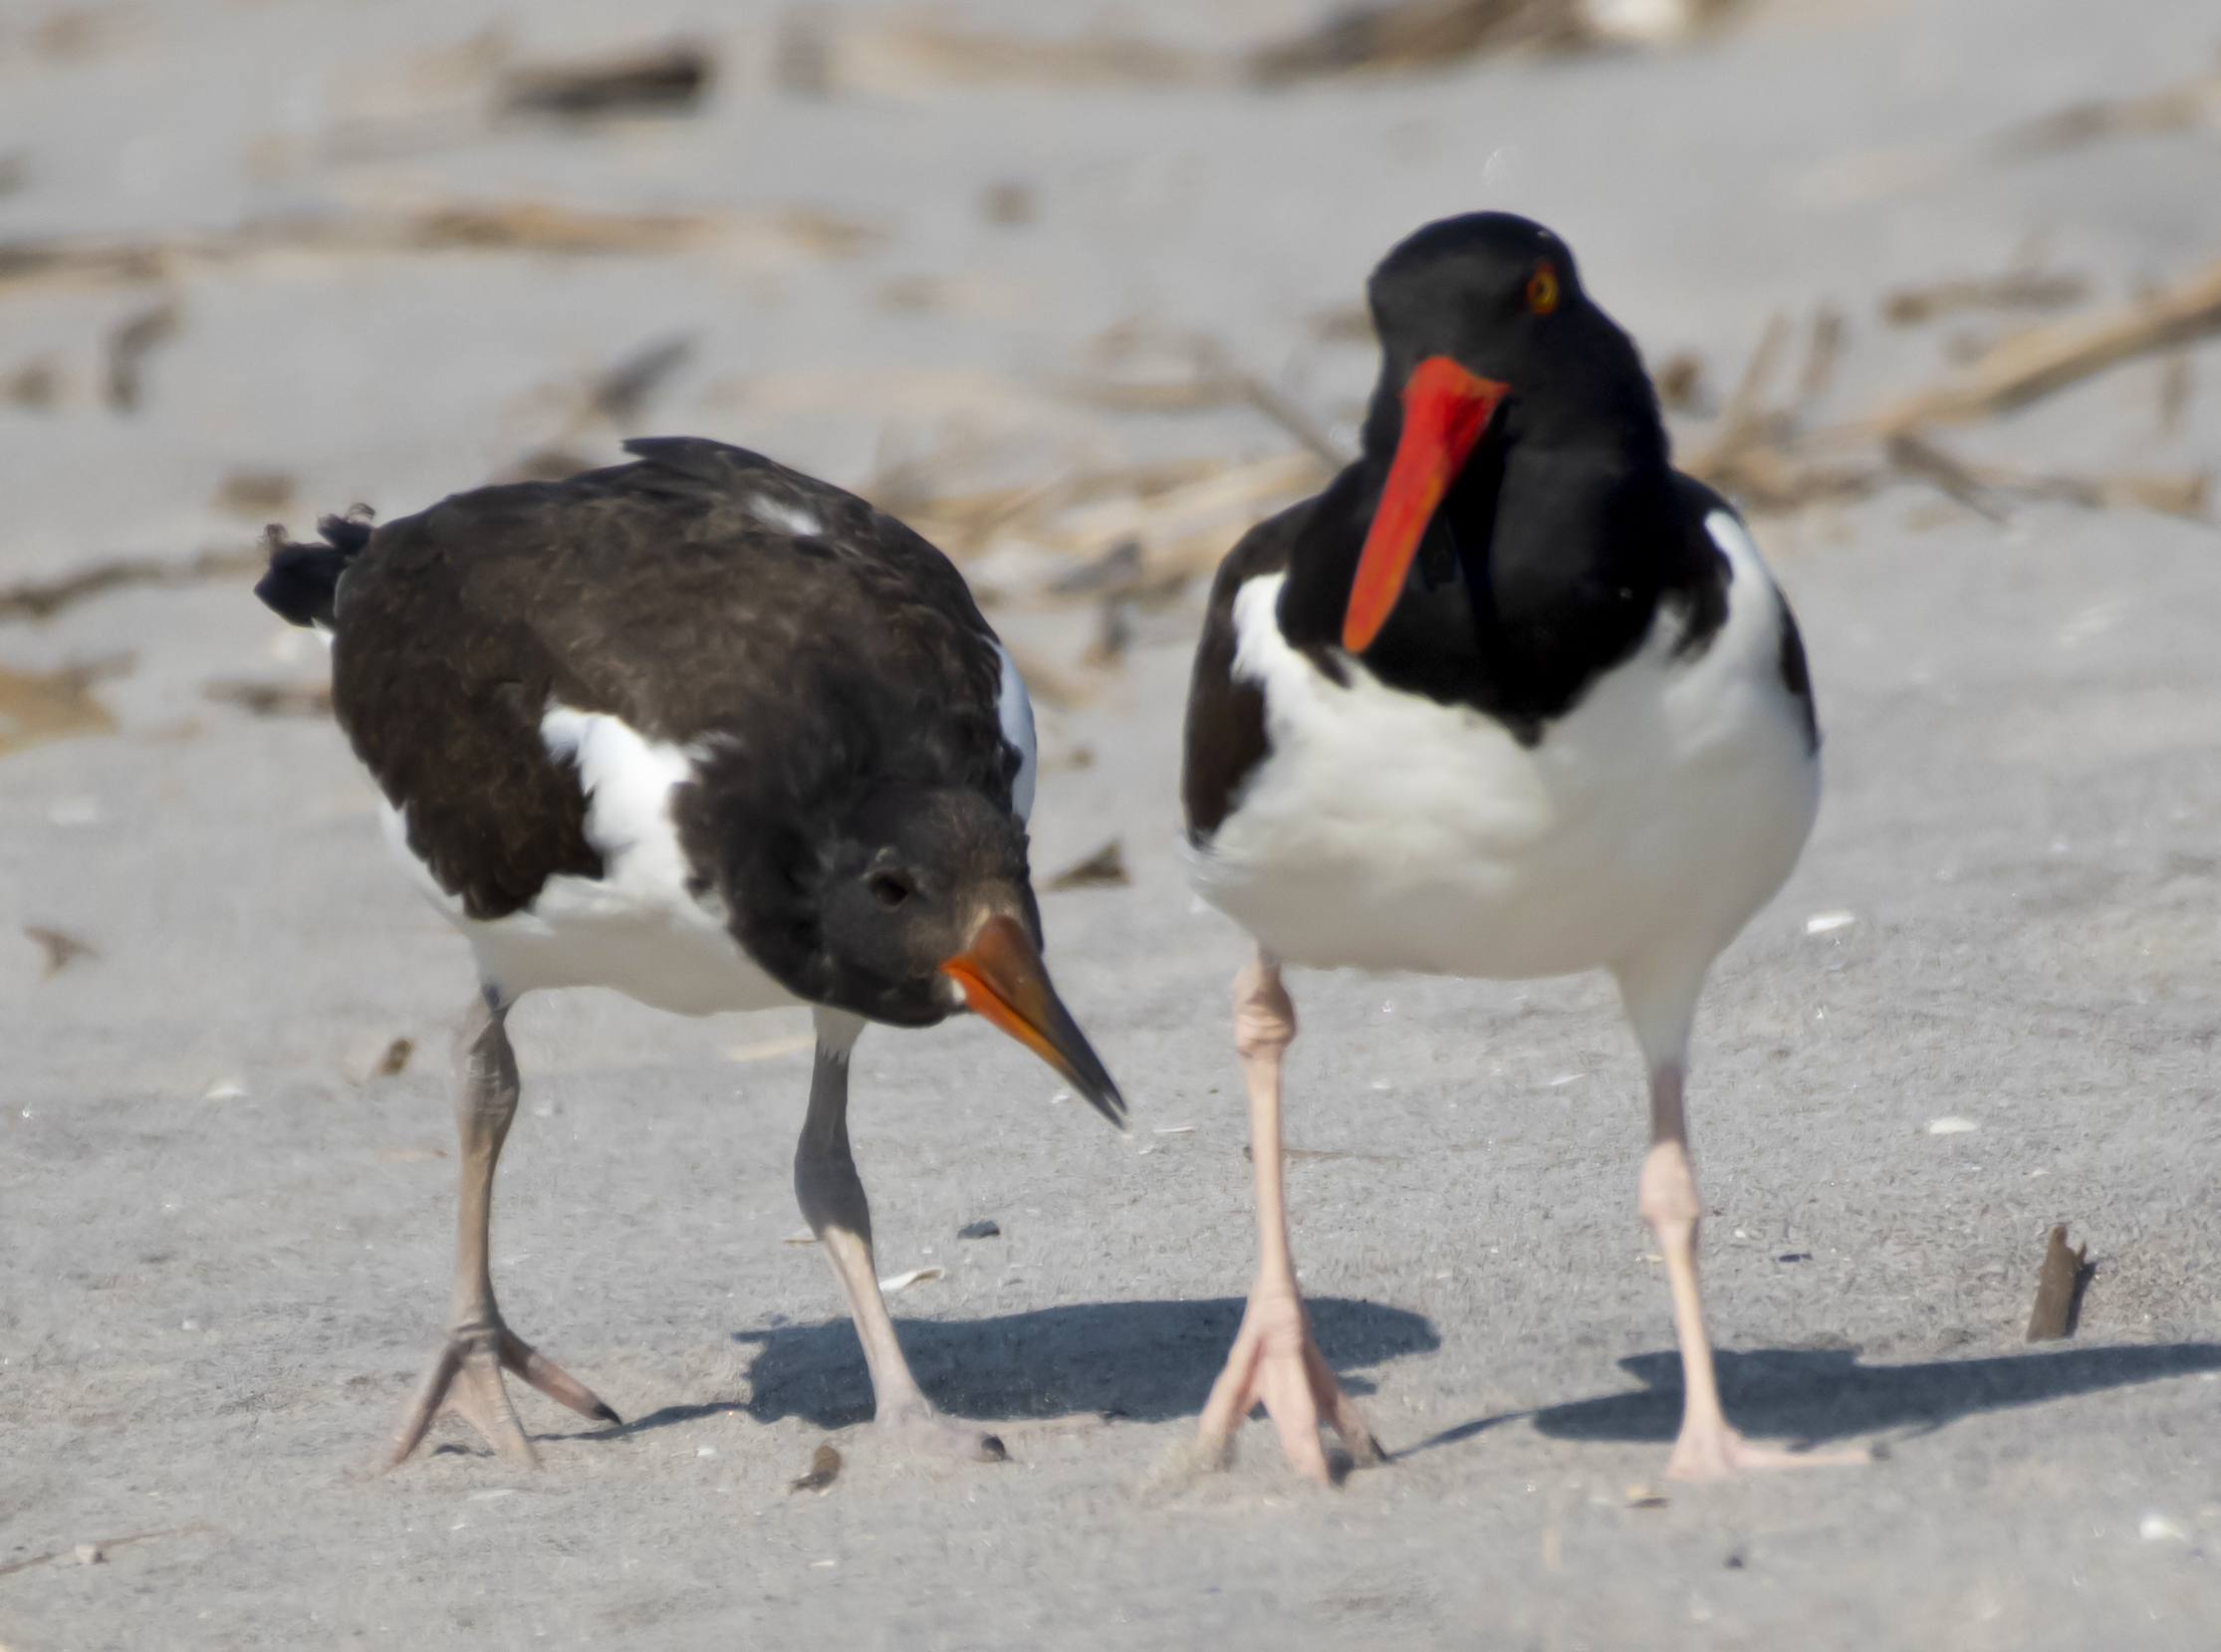 An oystercatcher chick nudged its parent for food. (Photo by Gail Karlsson)